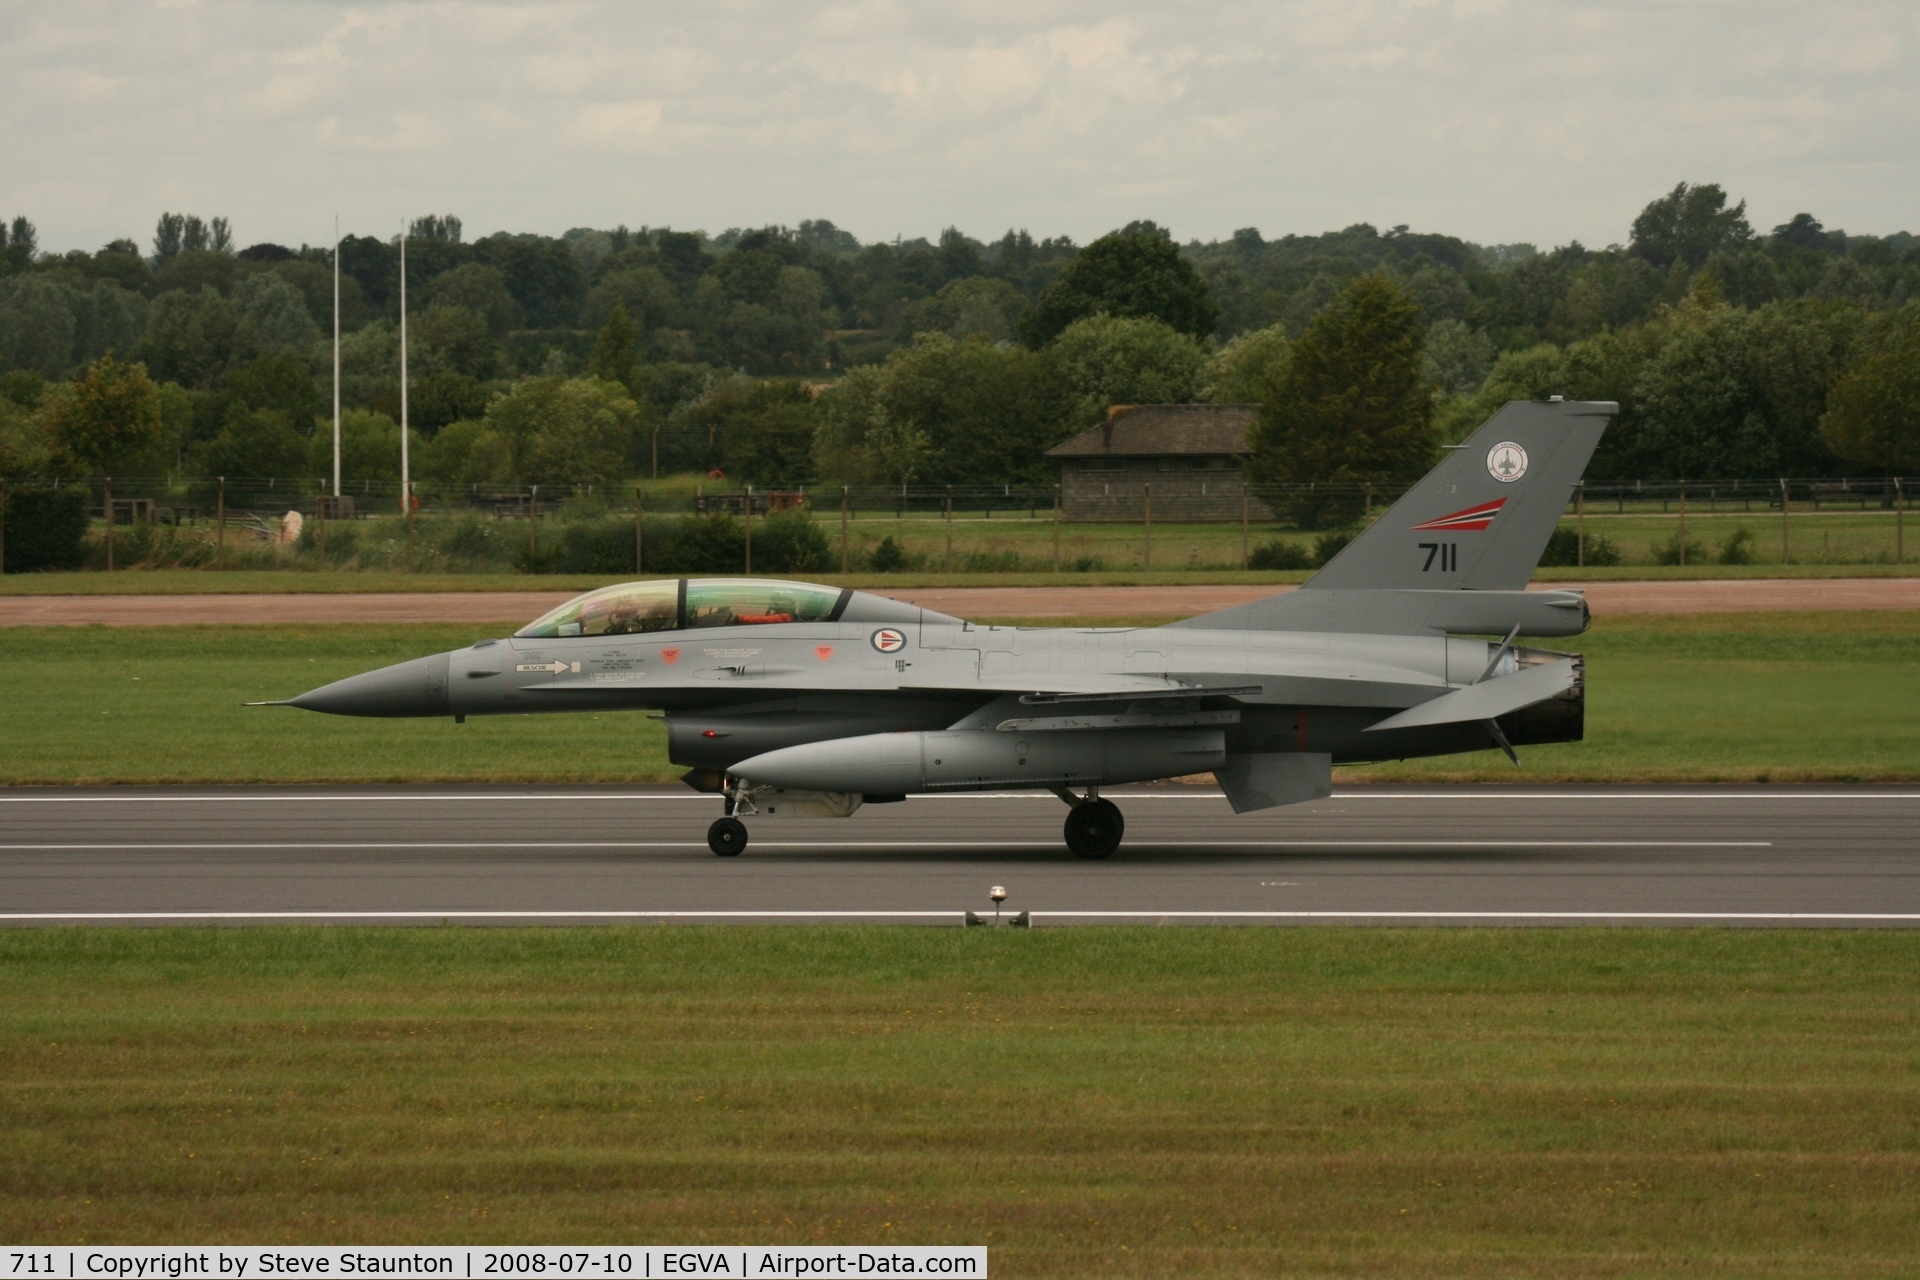 711, 1989 General Dynamics F-16BM Fighting Falcon C/N 6L-13, Taken at the Royal International Air Tattoo 2008 during arrivals and departures (show days cancelled due to bad weather)